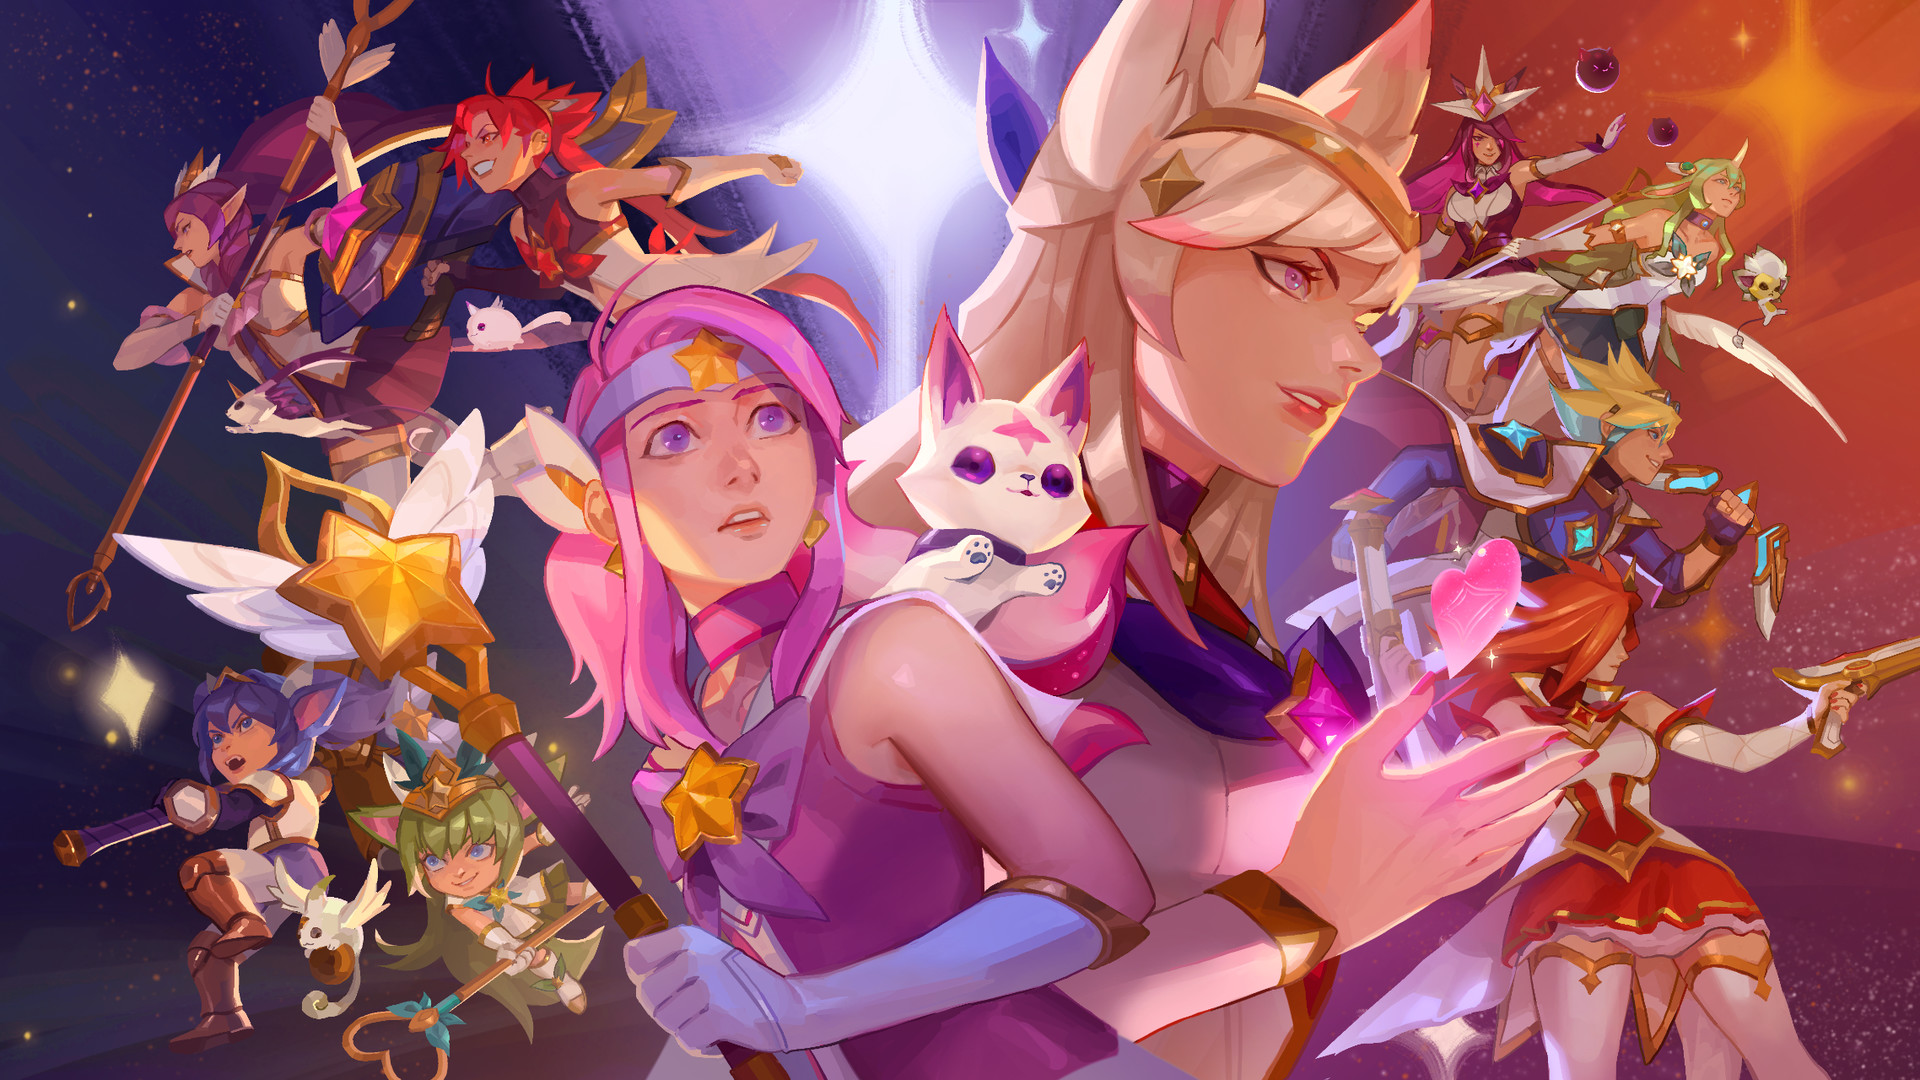 Anime 1920x1080 Riot Games League of Legends Star Guardian Lux (League of Legends) Star Guardian Ahri Star Guardian Ezreal Star Guardian Miss Fortune Syndra (League of Legends) Poppy (League of Legends) Jinx (League of Legends) Lulu (League of Legends) Janna (League of Legends) Miss Fortune (League of Legends) PC gaming video game girls video game characters